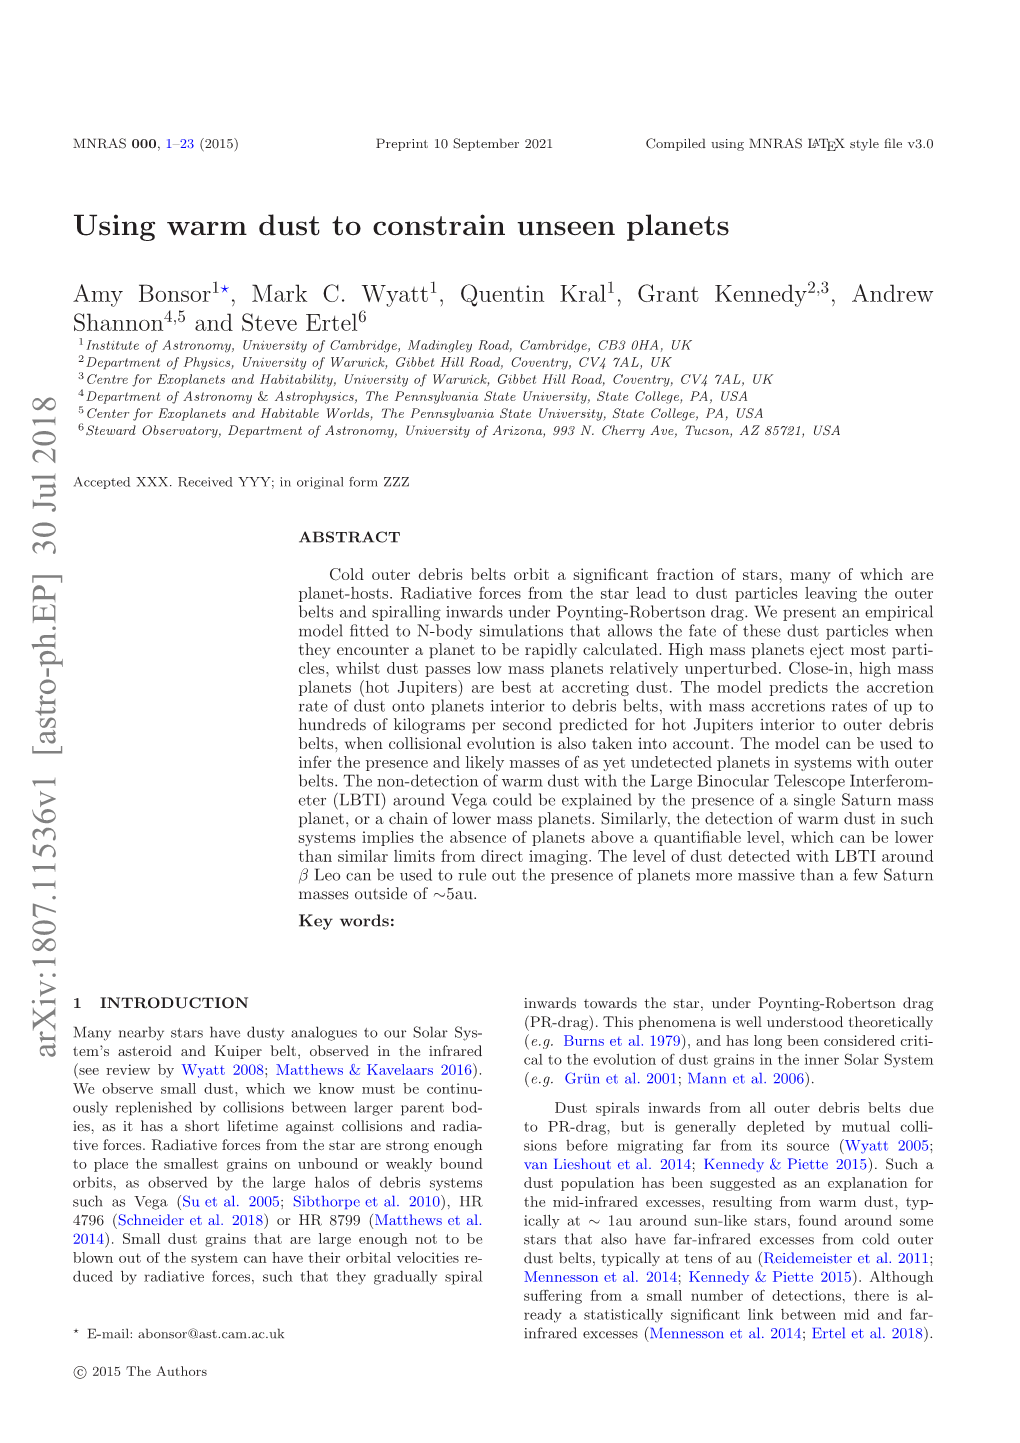 Using Warm Dust to Constrain Unseen Planets